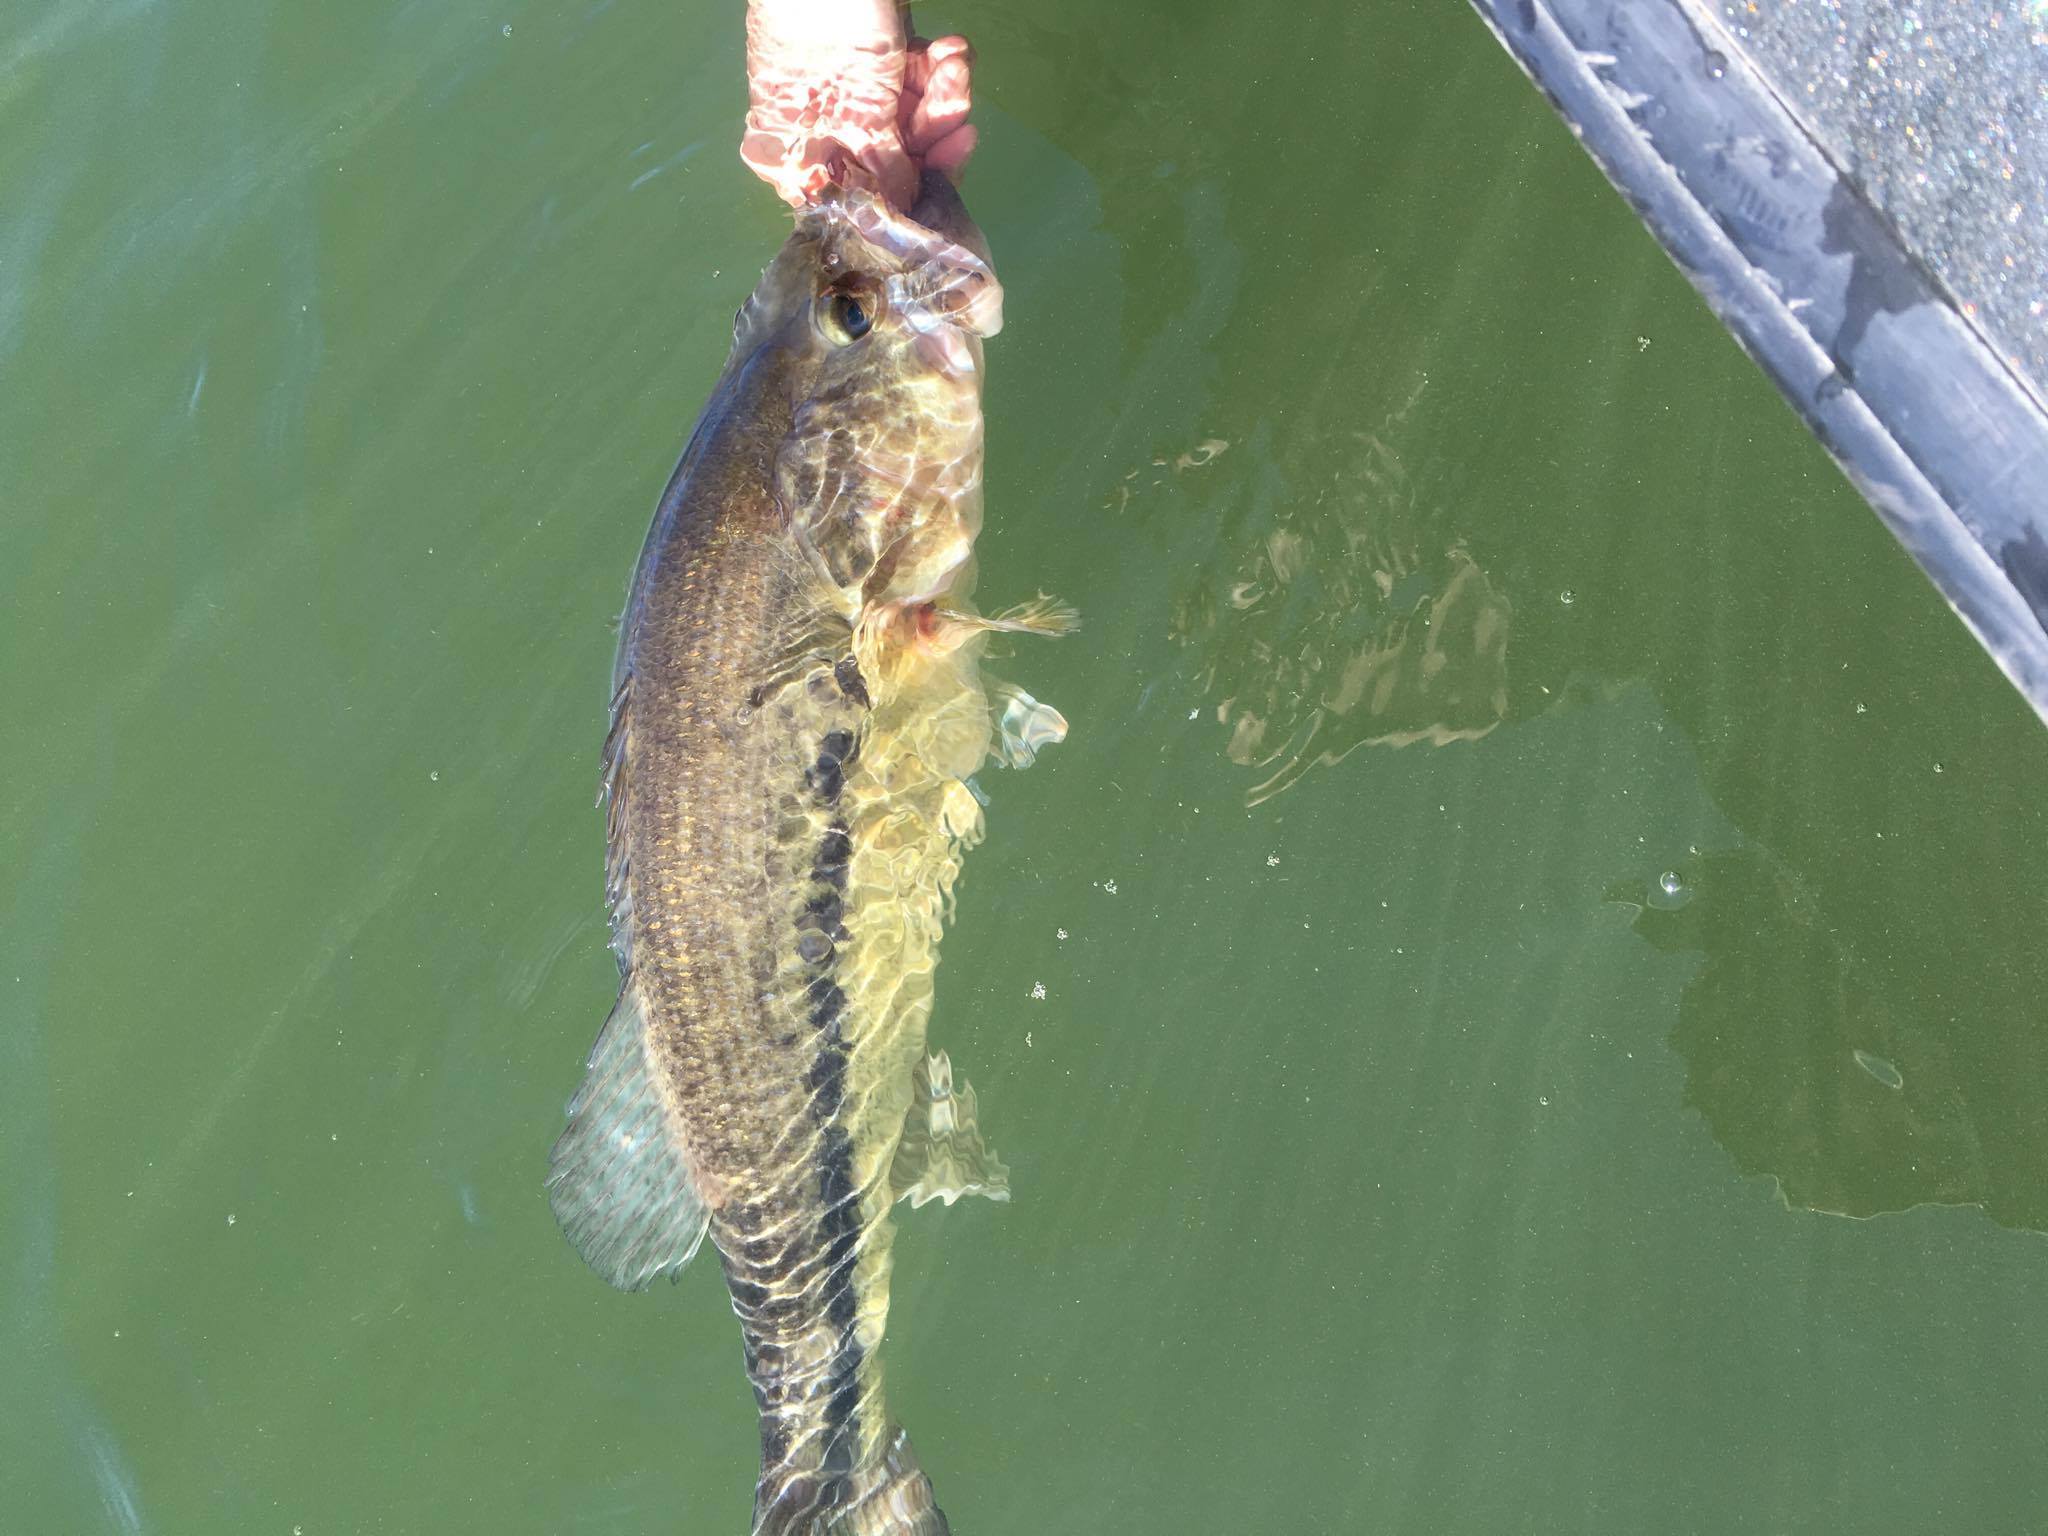 7lber in water